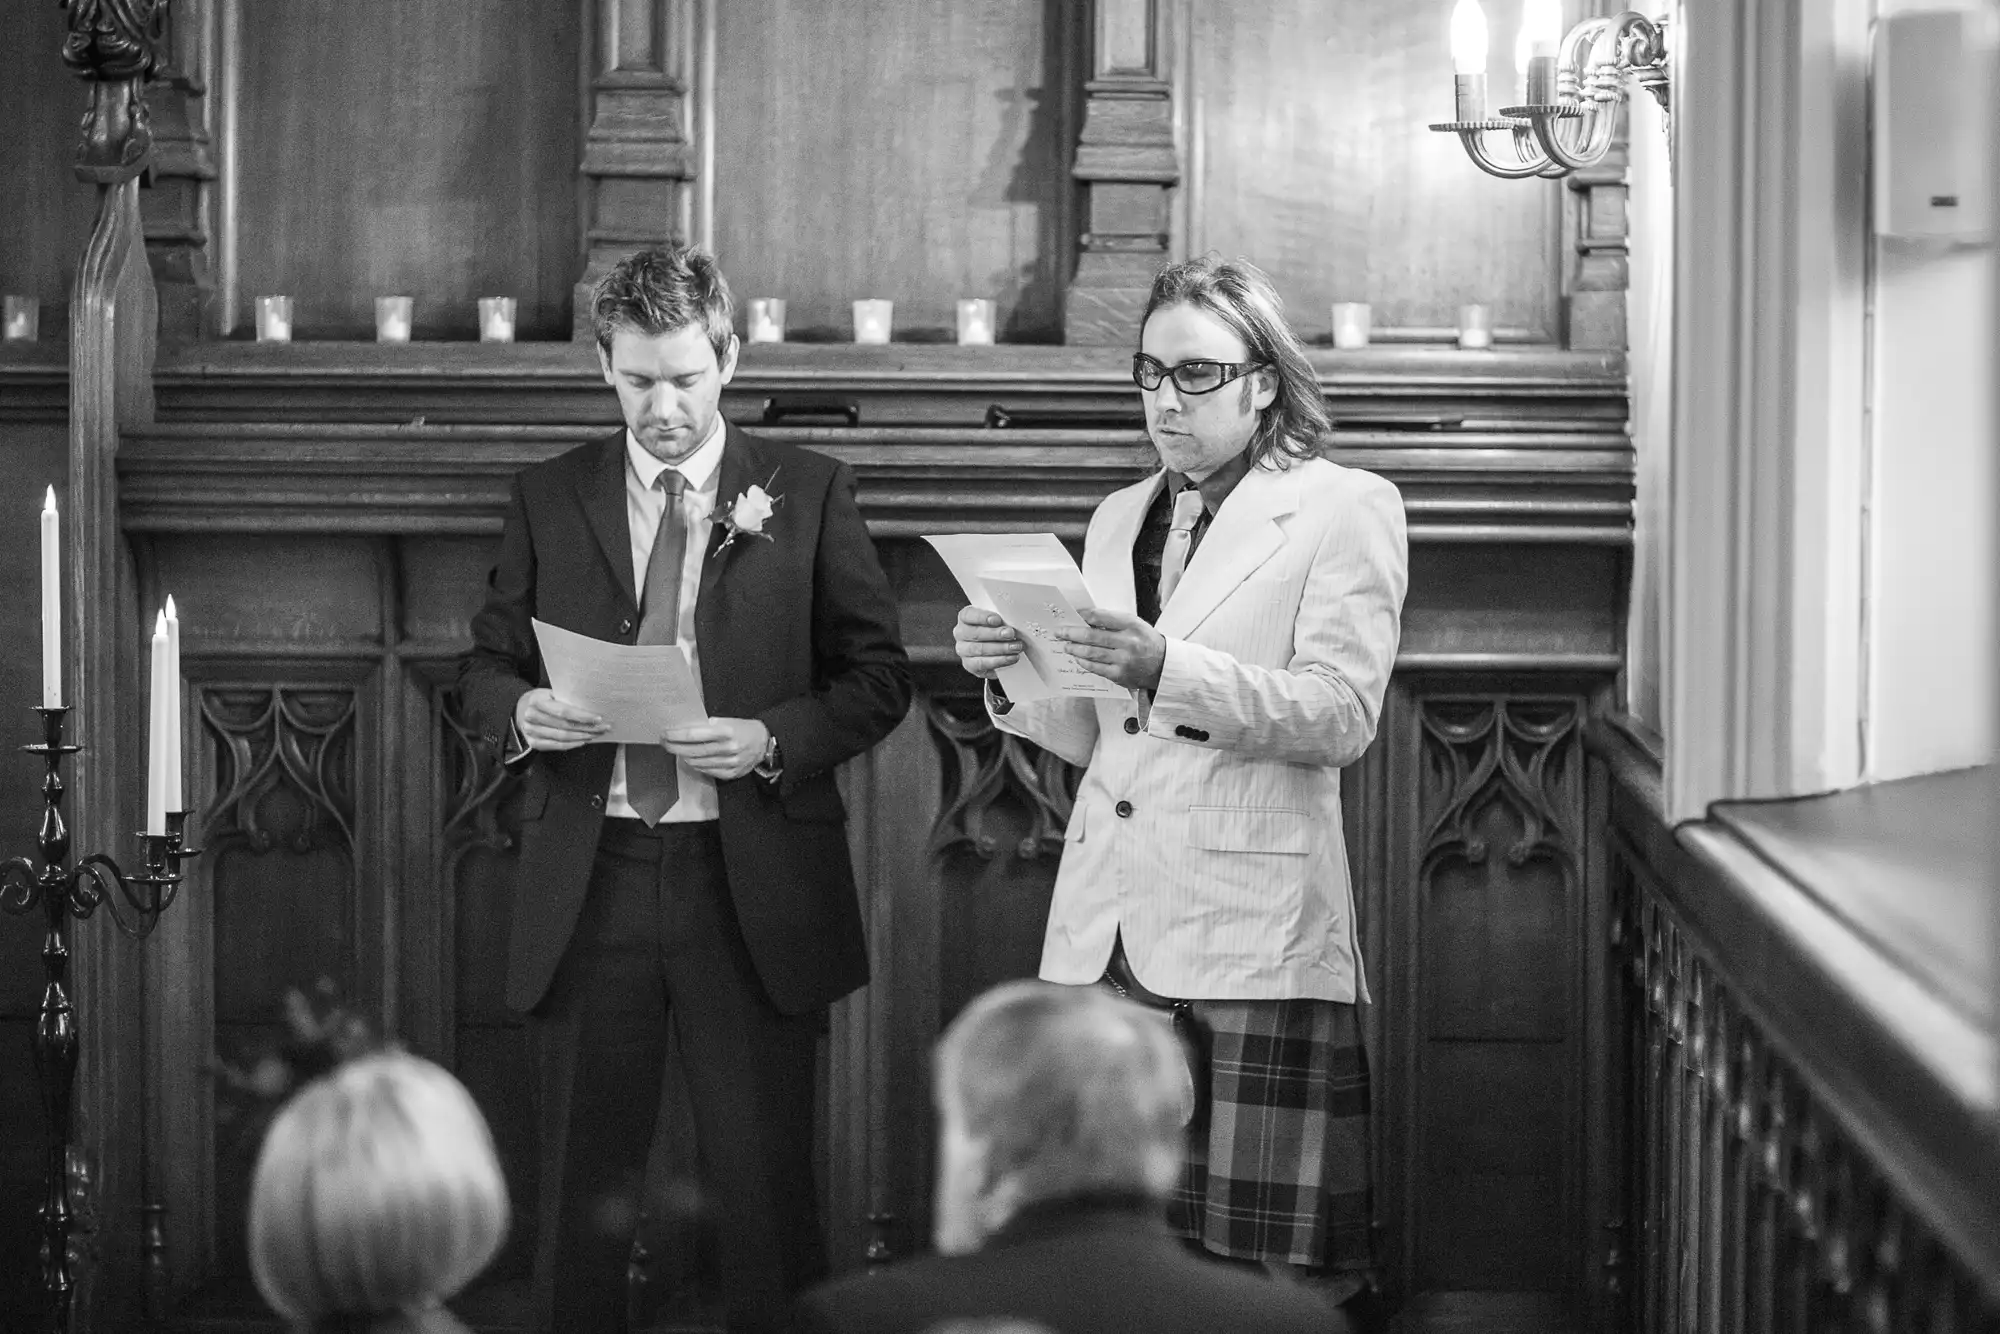 Two men reading from papers at a formal event inside a church, with one man in a traditional kilt and the other in a suit.